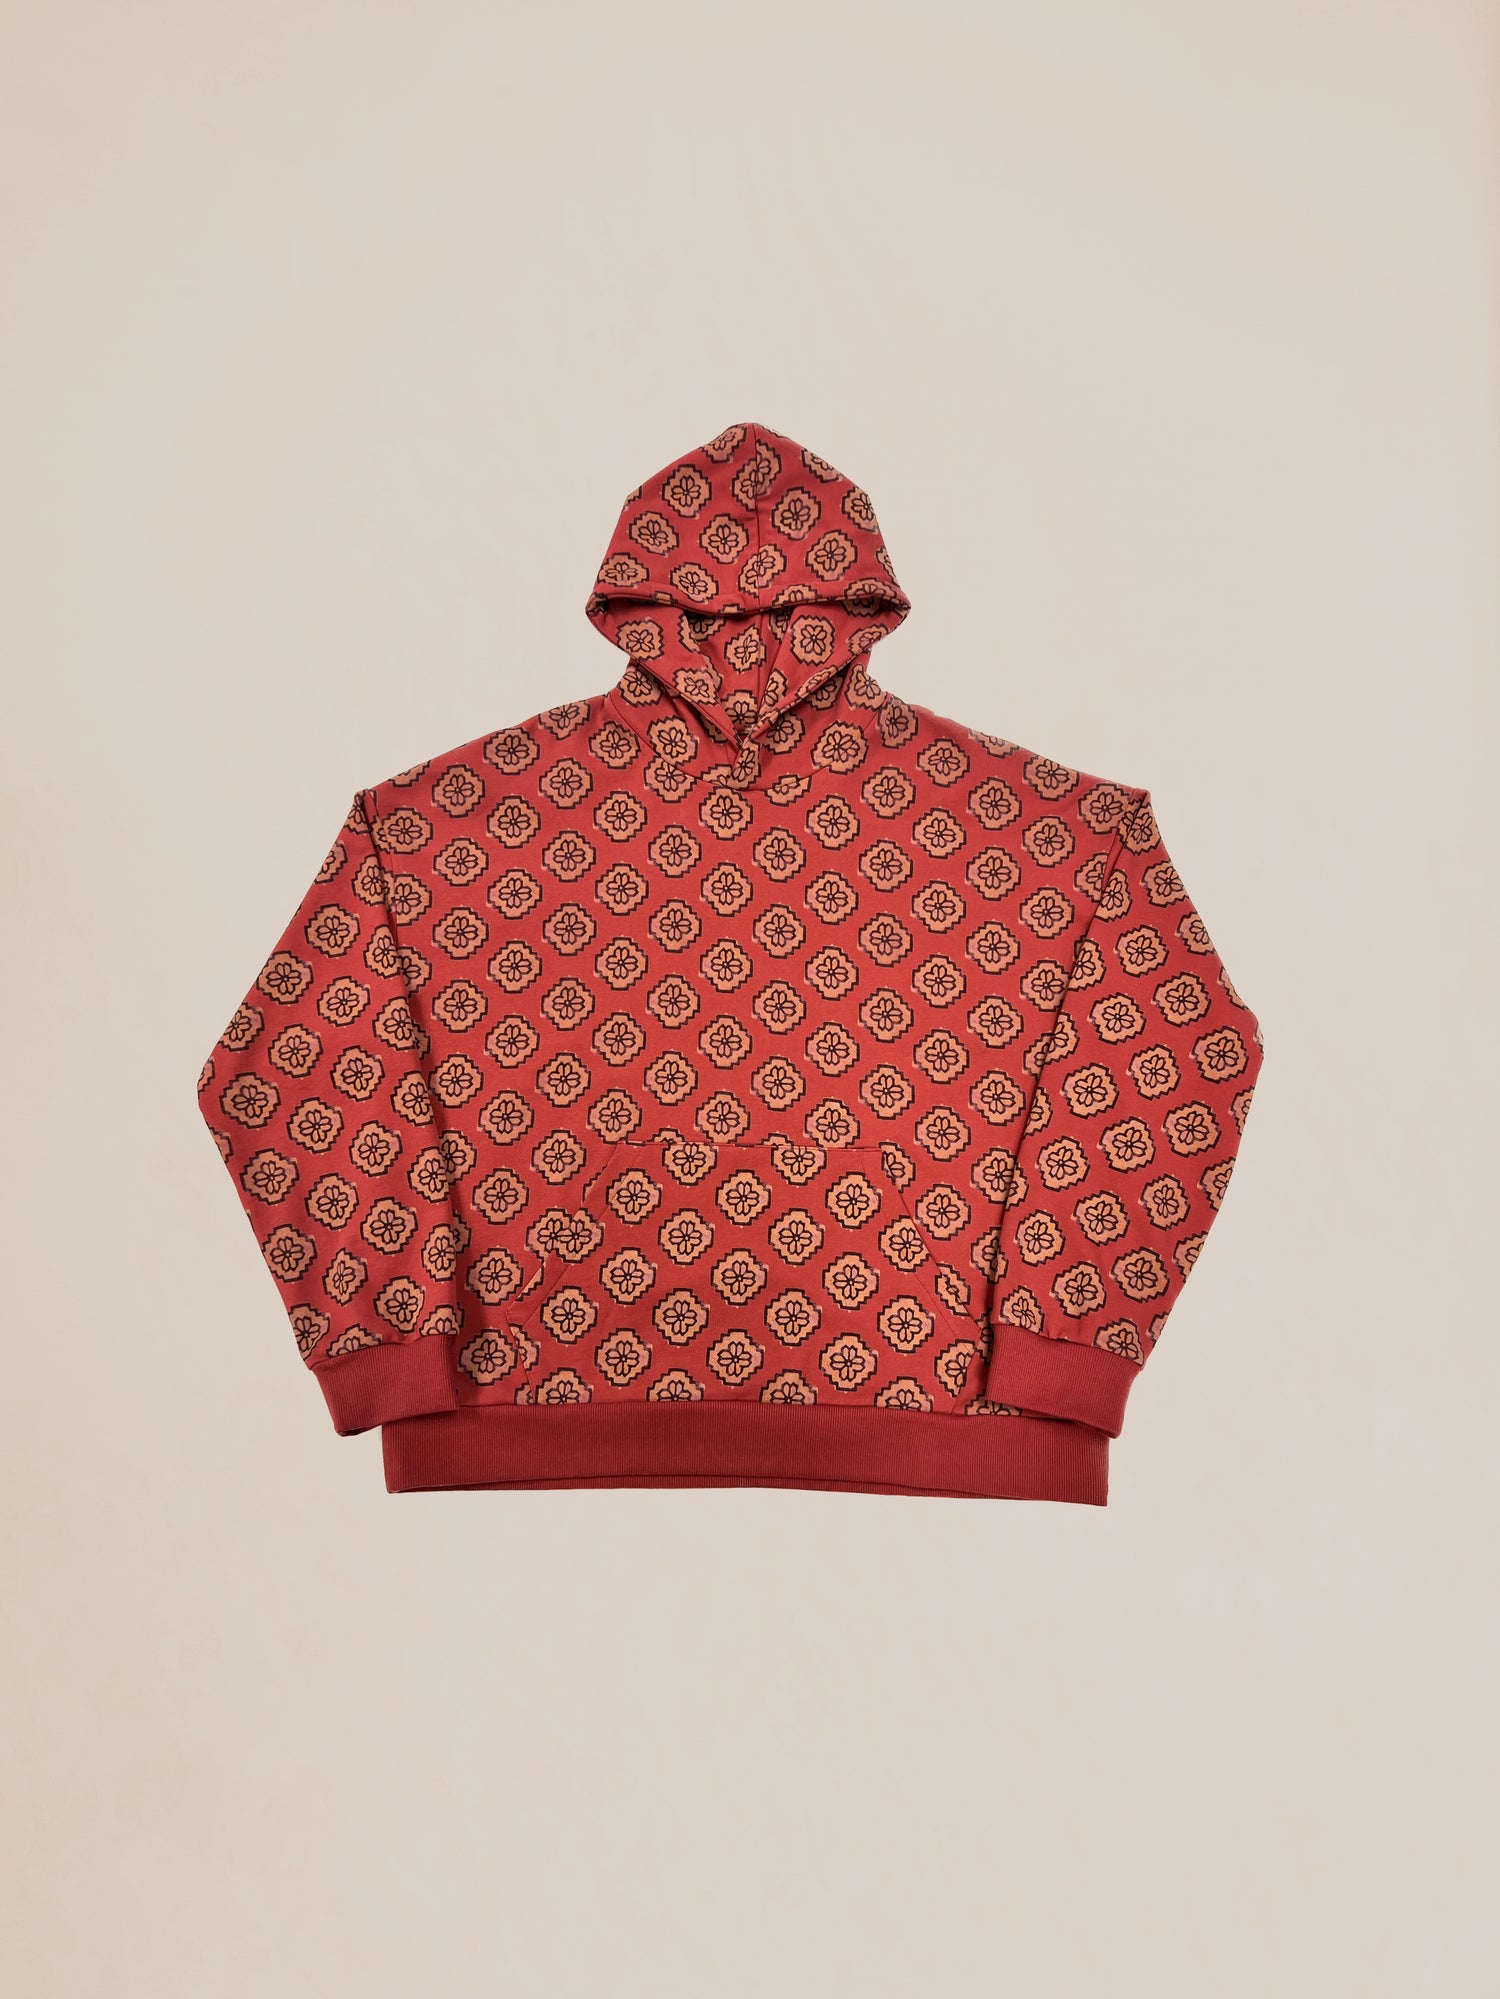 Pre-production Sample 43 of a red monogram patterned hooded sweatshirt displayed on a plain background by Profound.